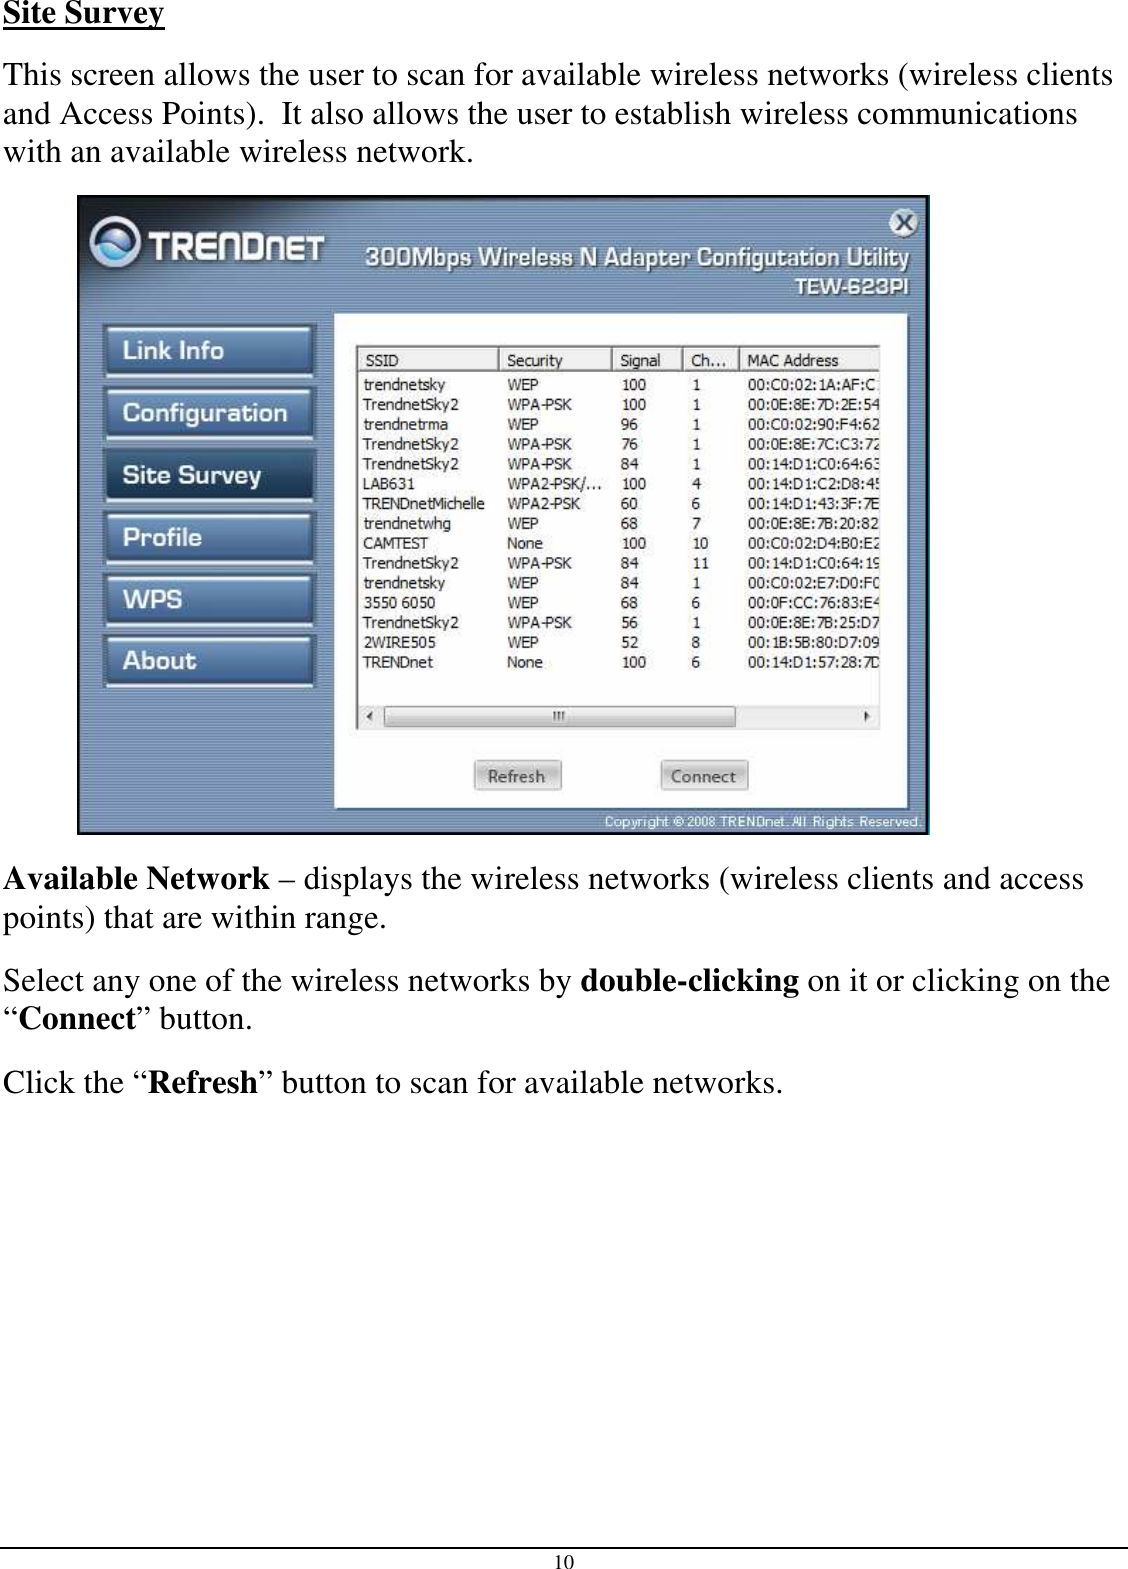 10 Site Survey This screen allows the user to scan for available wireless networks (wireless clients and Access Points).  It also allows the user to establish wireless communications with an available wireless network.  Available Network – displays the wireless networks (wireless clients and access points) that are within range.  Select any one of the wireless networks by double-clicking on it or clicking on the “Connect” button. Click the “Refresh” button to scan for available networks. 